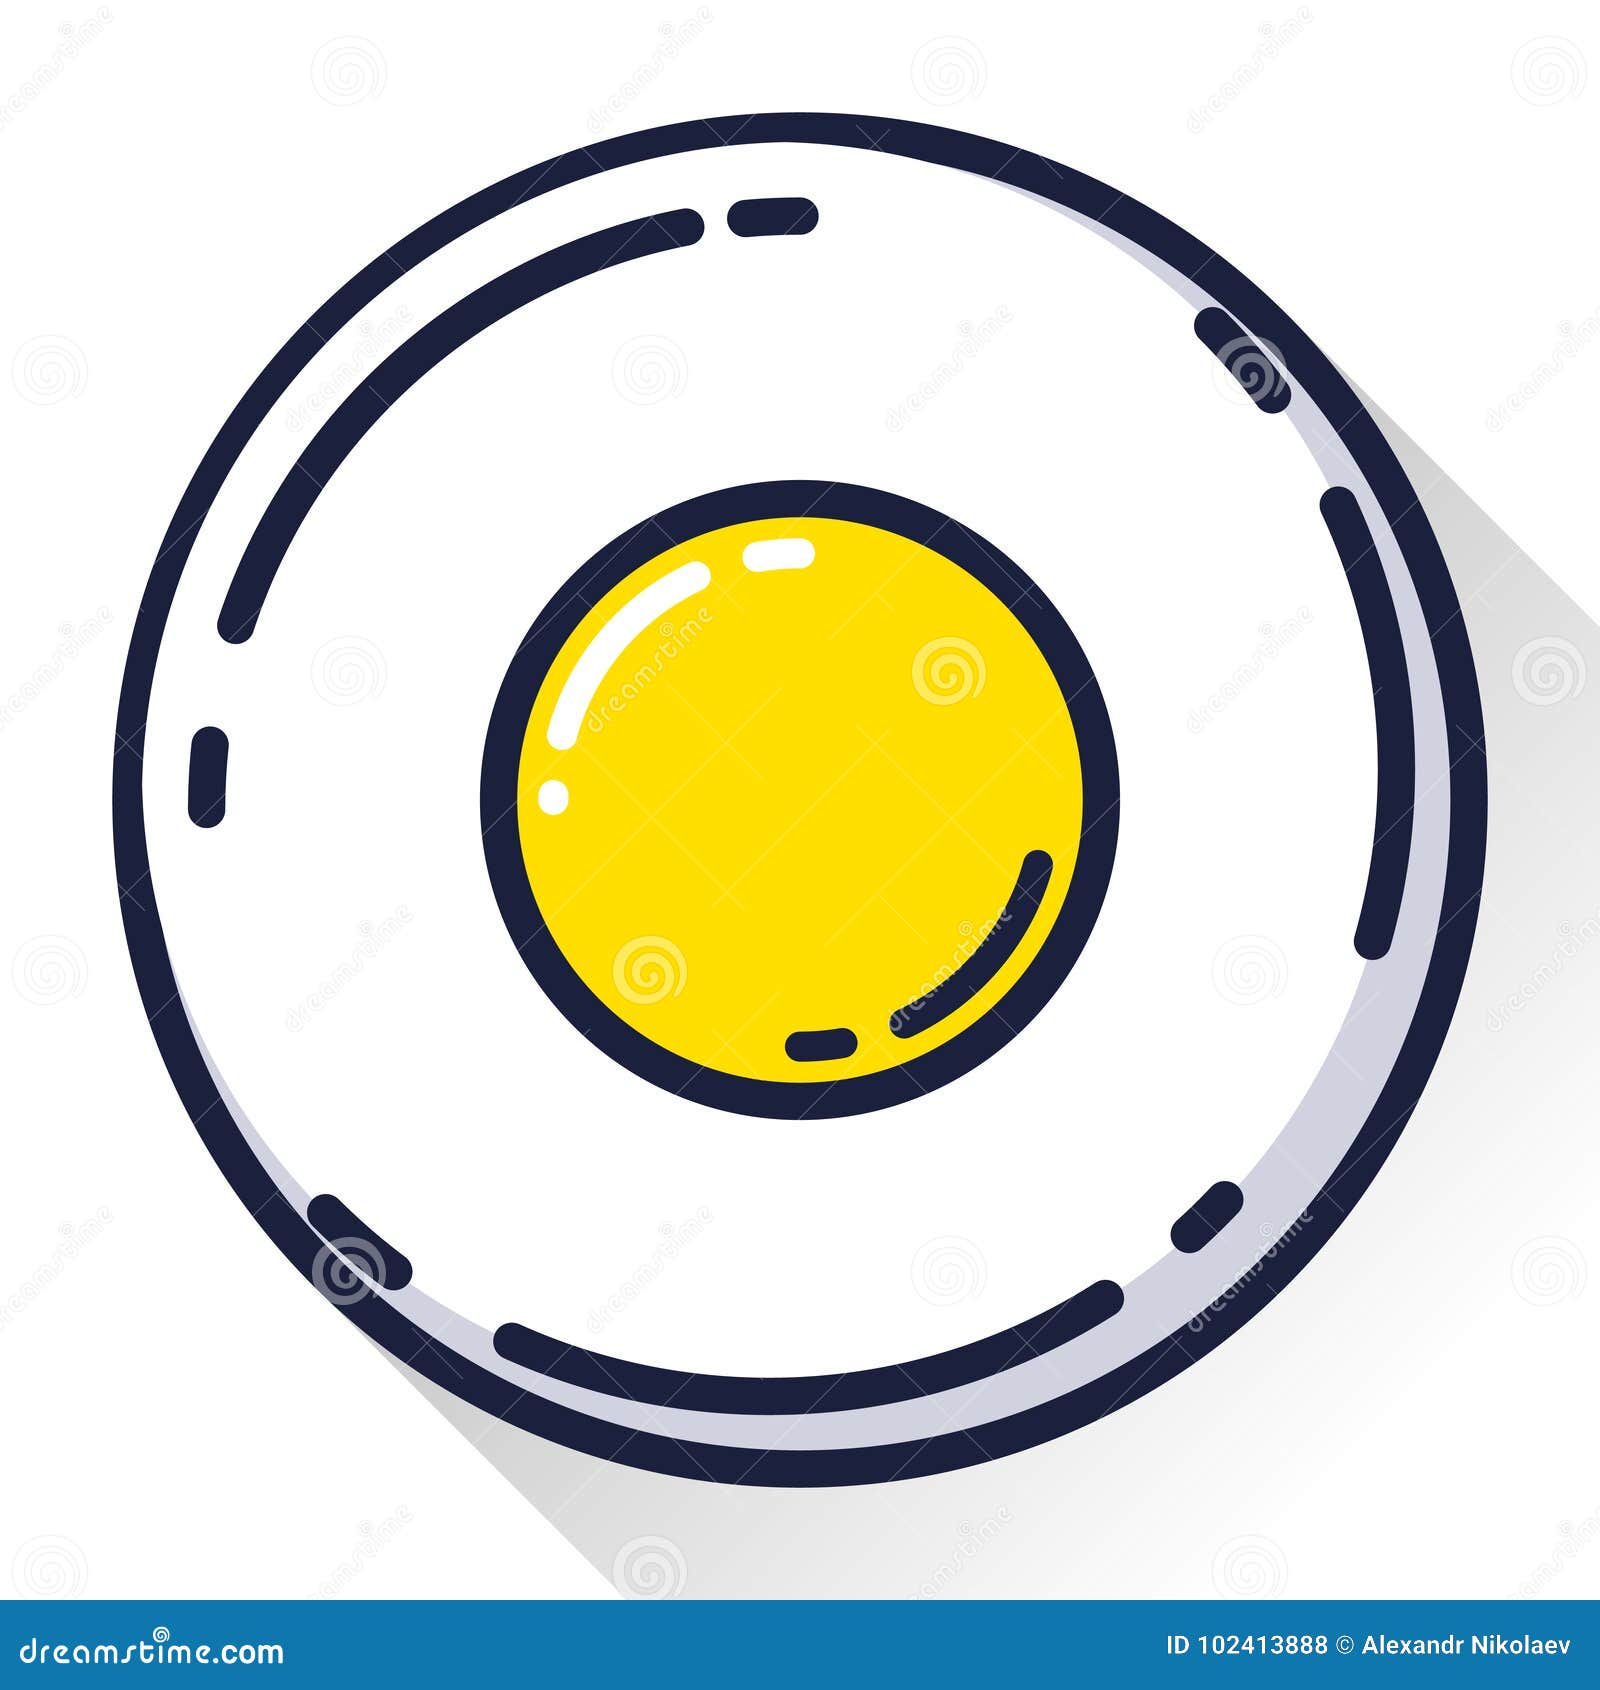 fried egg perfectly round best simple breakfast logo